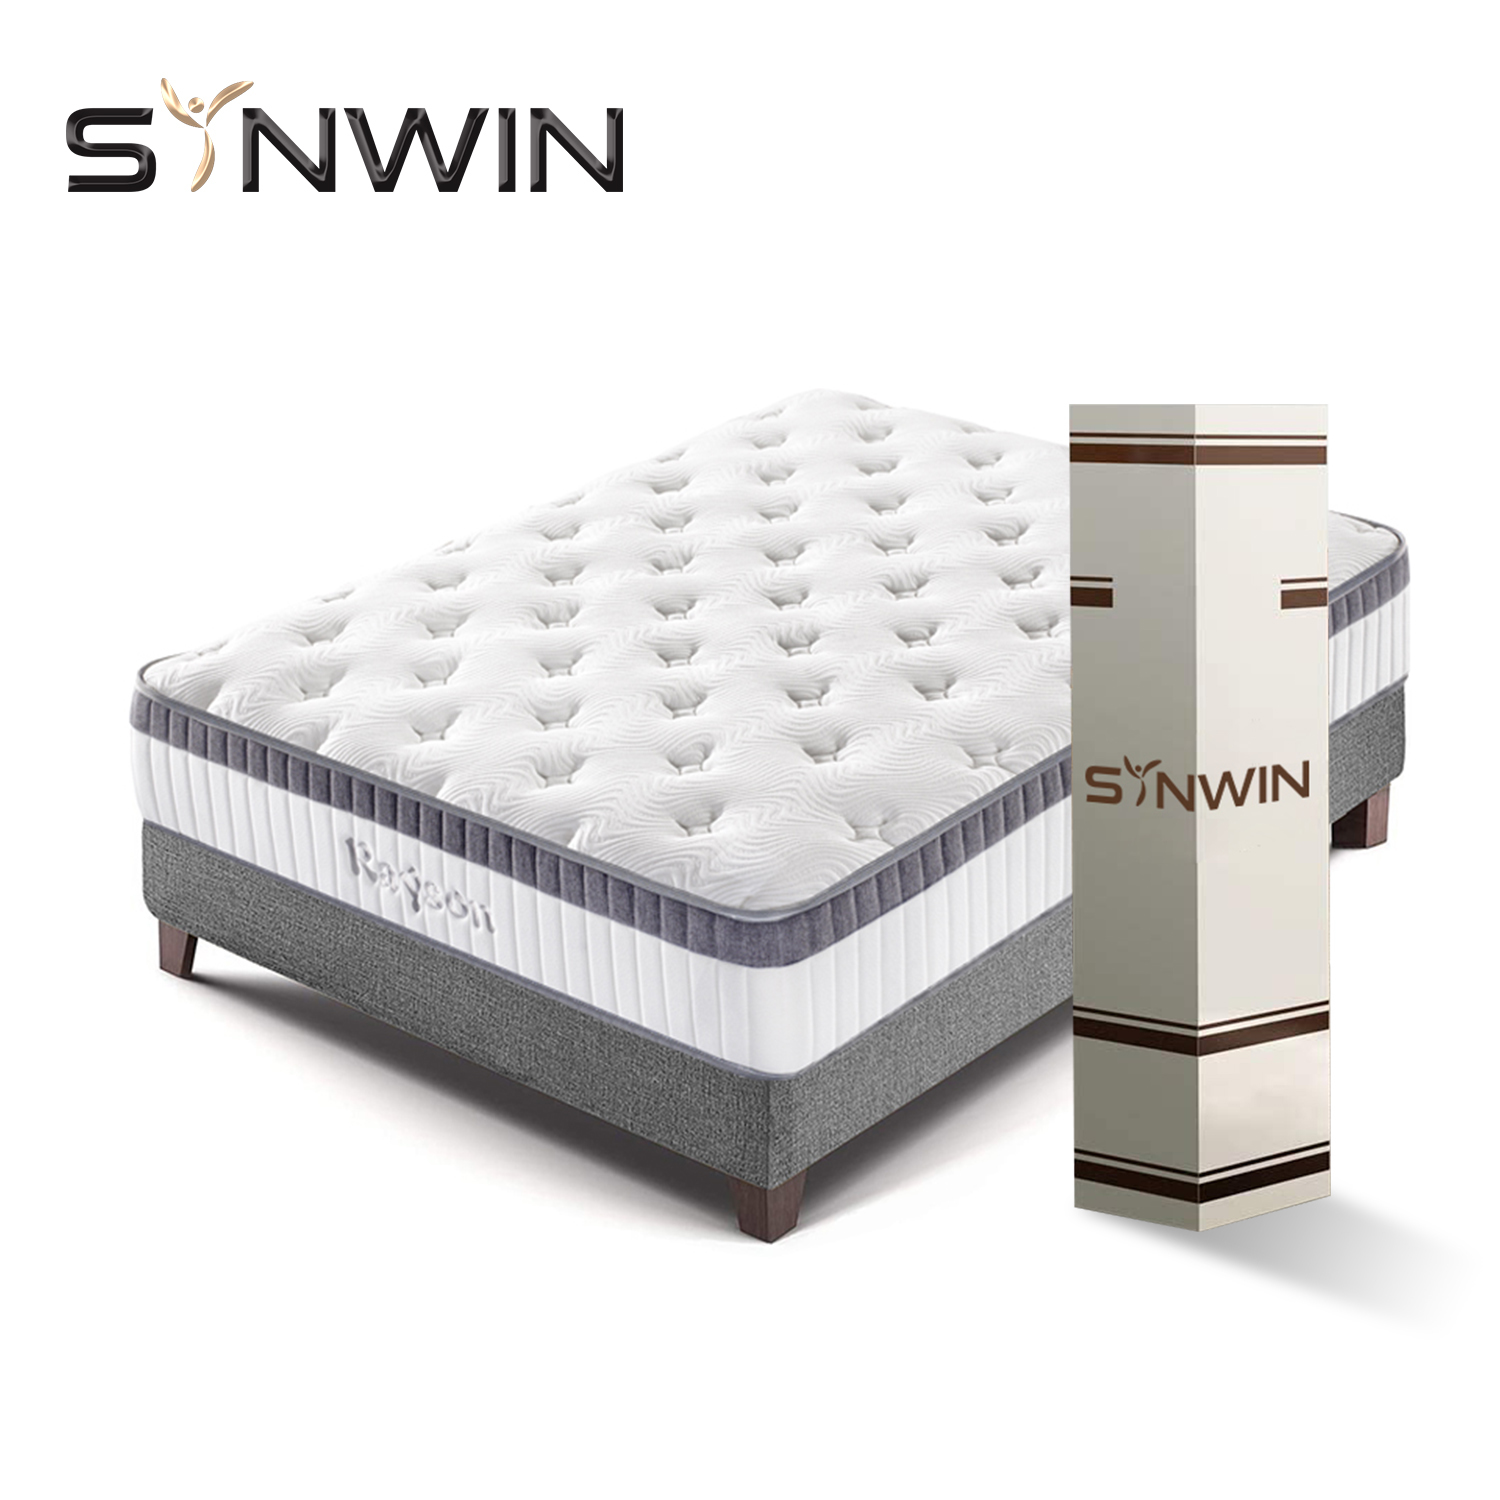 25cm Roll up packing euro top bed pocket spring mattress in box